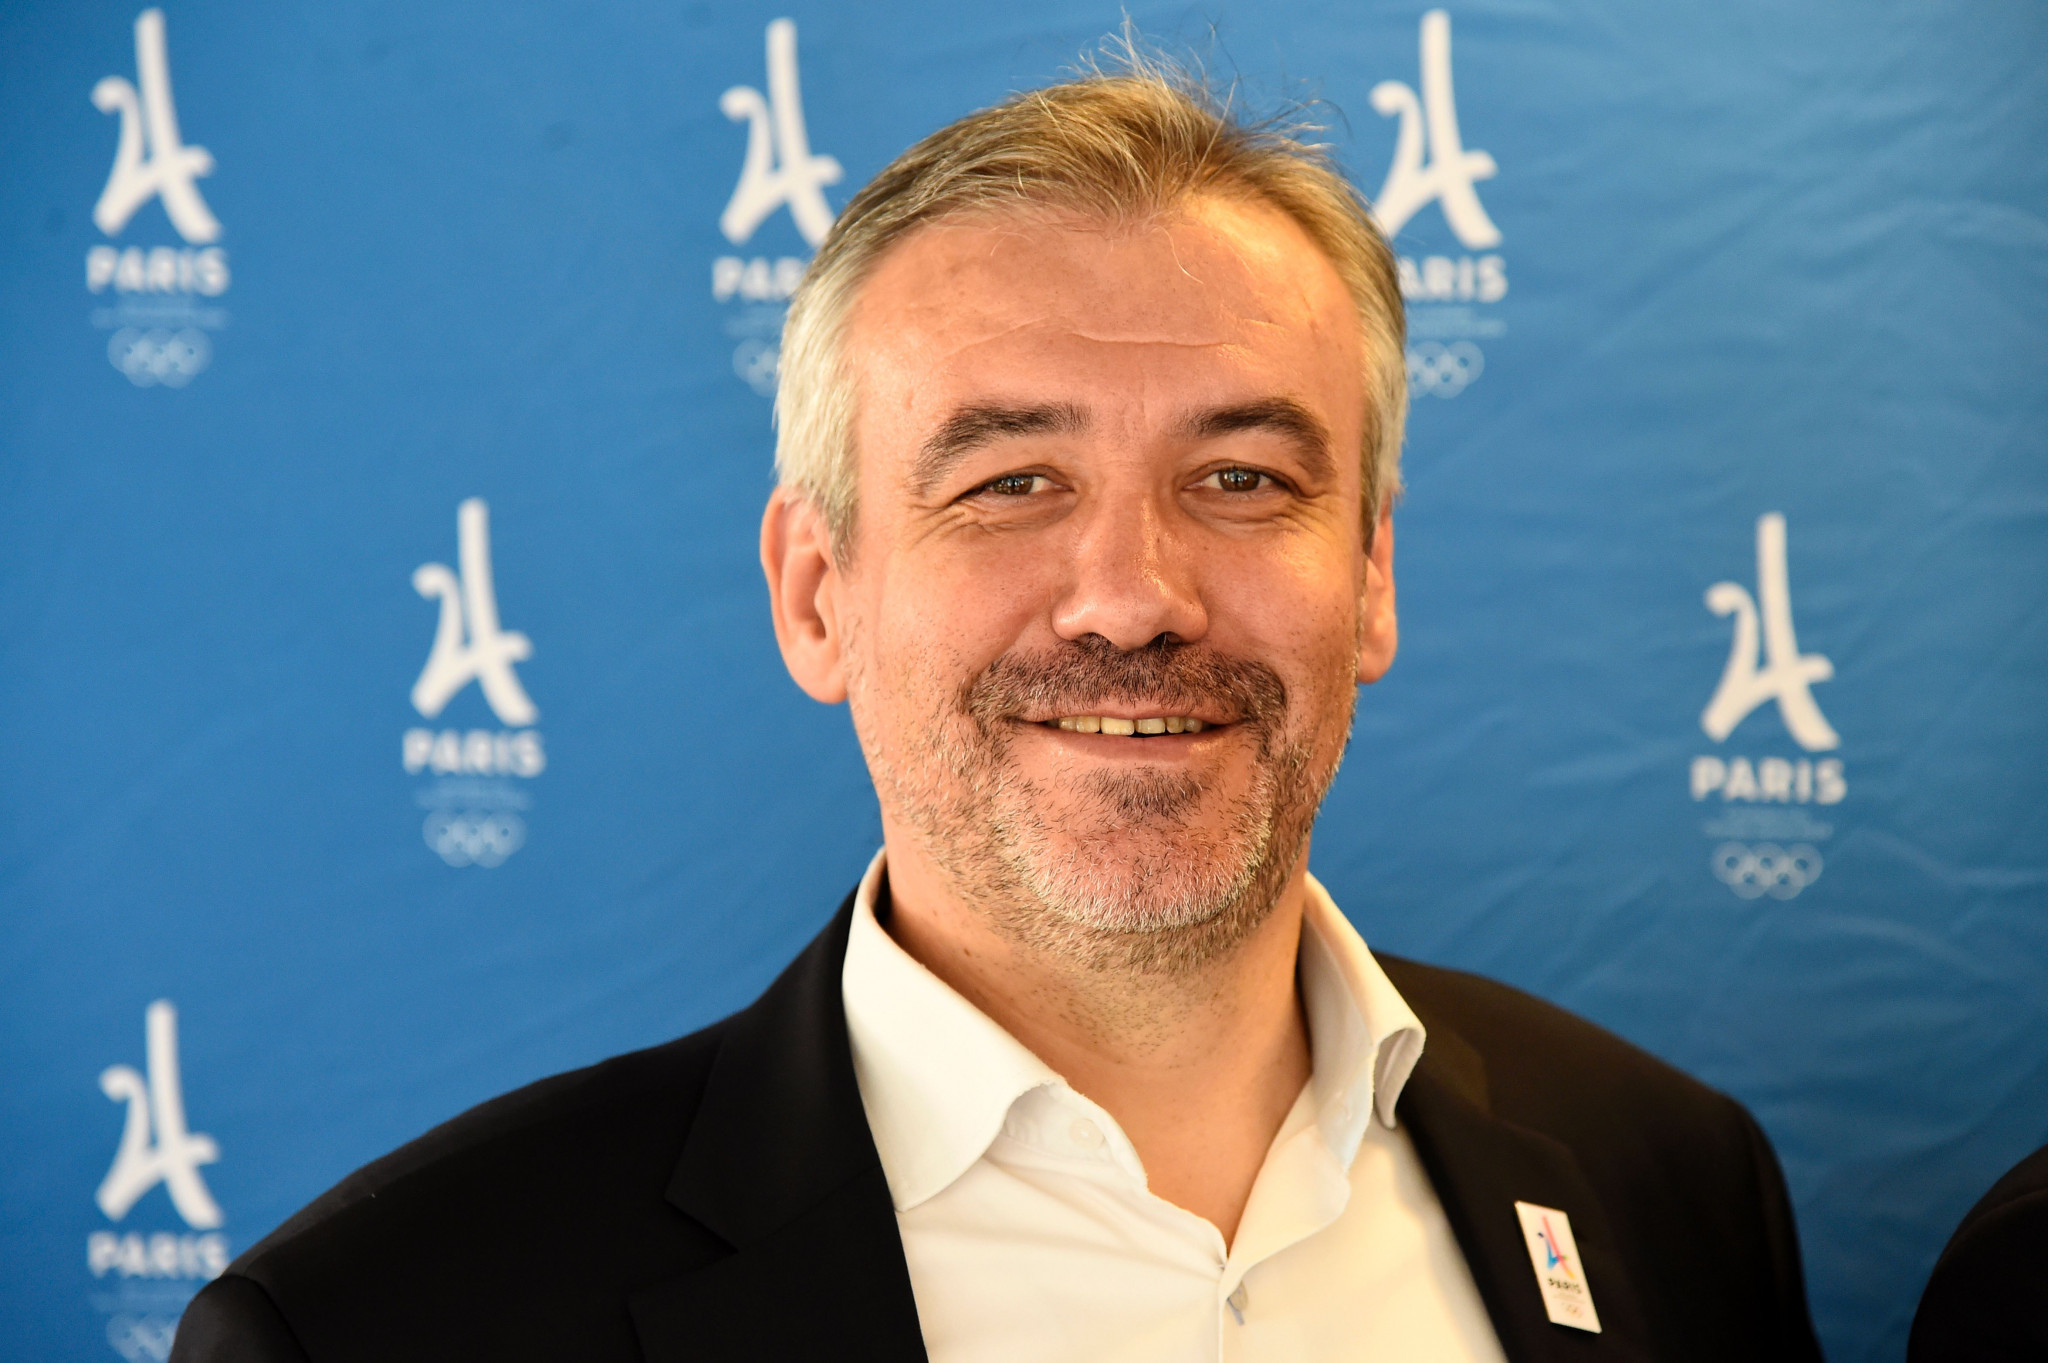 Thobois appointed Paris 2024 director general